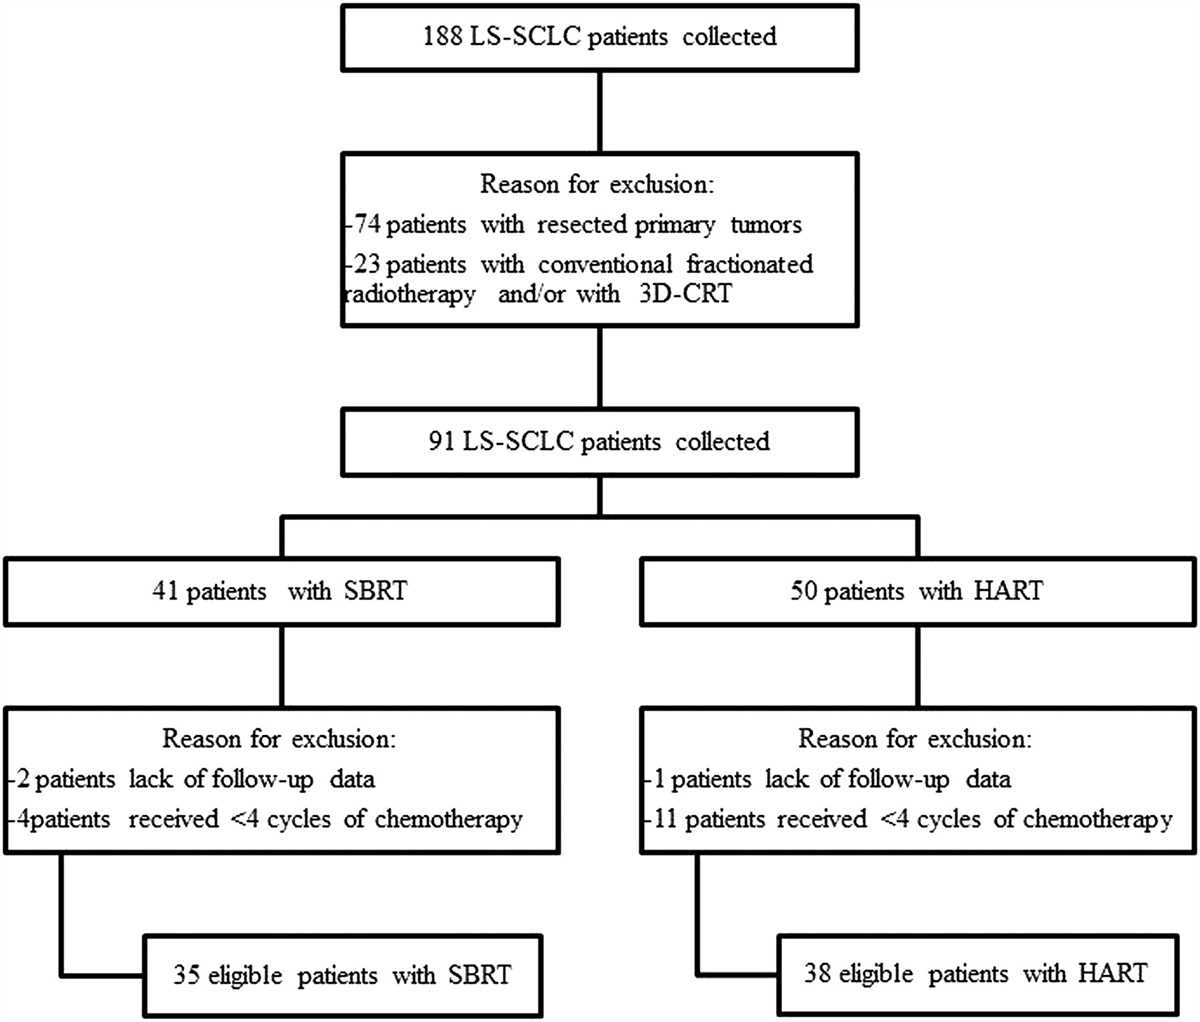 Hyperfractionated Accelerated Radiotherapy Versus Stereotactic Body Radiotherapy in the Treatment of Limited-Stage Small Cell Lung Cancer: A Matched-Pair Analysis